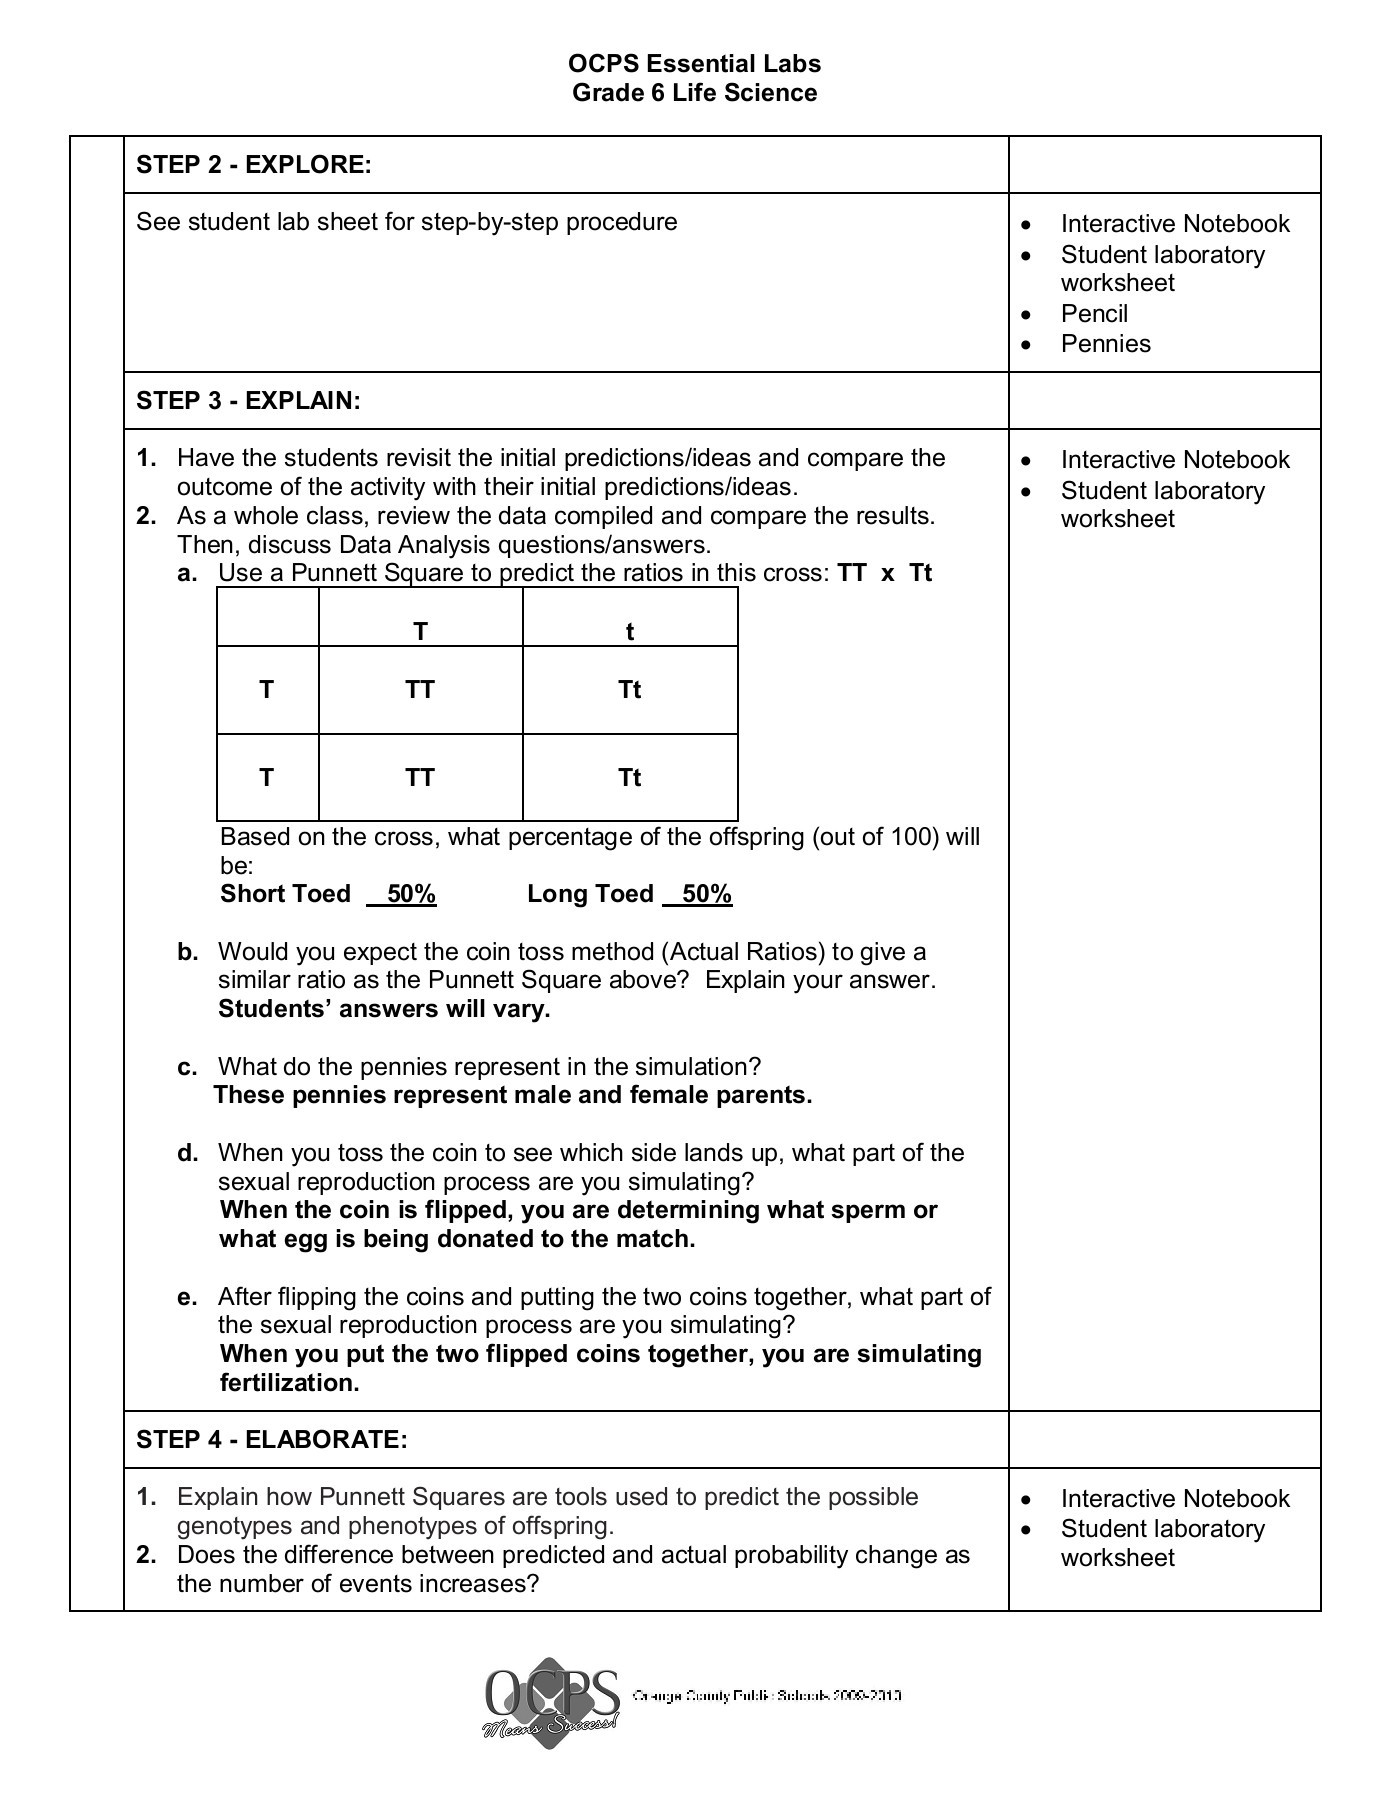 Genotypes and Phenotypes Worksheet Answers Grade 6 Life Science Penny Genetics What are the Chances